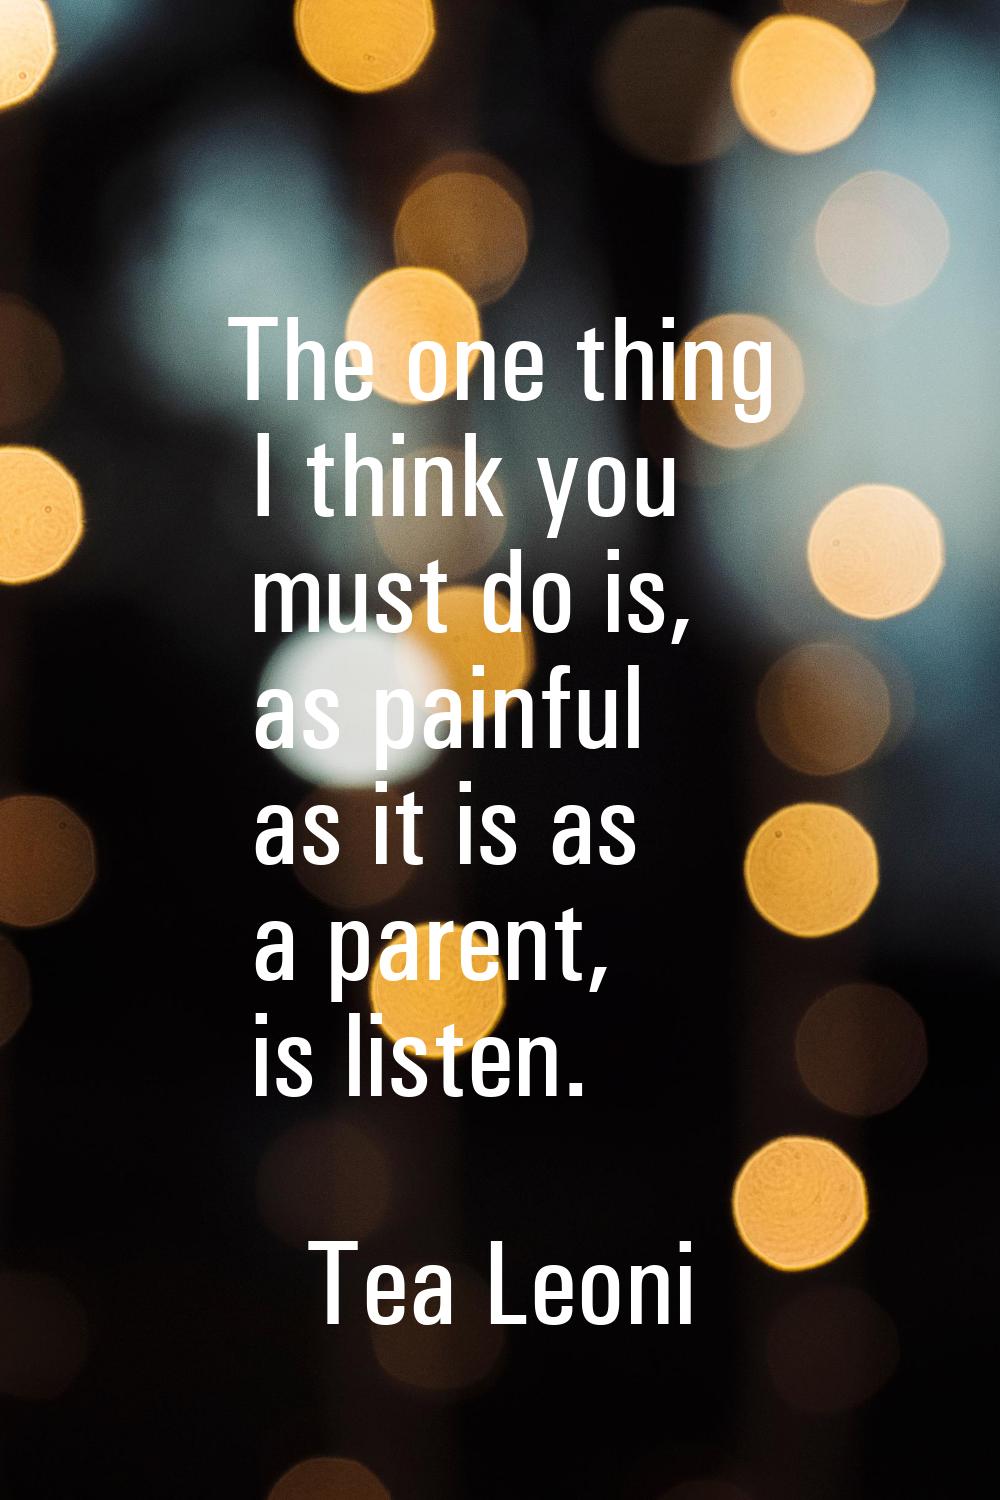 The one thing I think you must do is, as painful as it is as a parent, is listen.